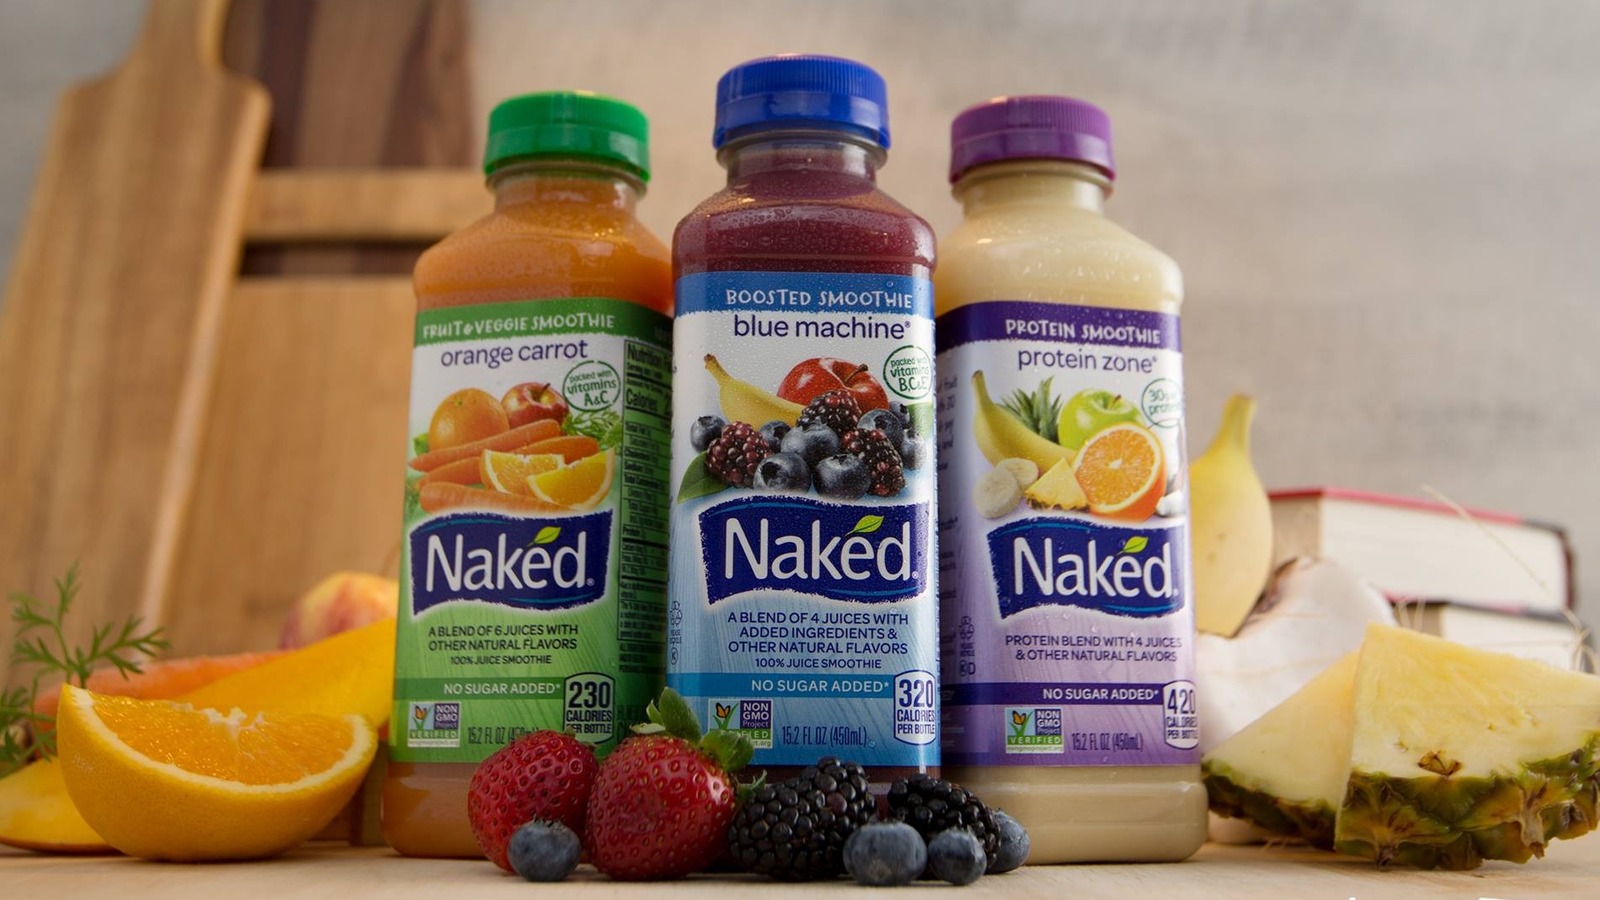 Naked Blue Machine Boosted Smoothie: Calories, Nutrition Analysis & More